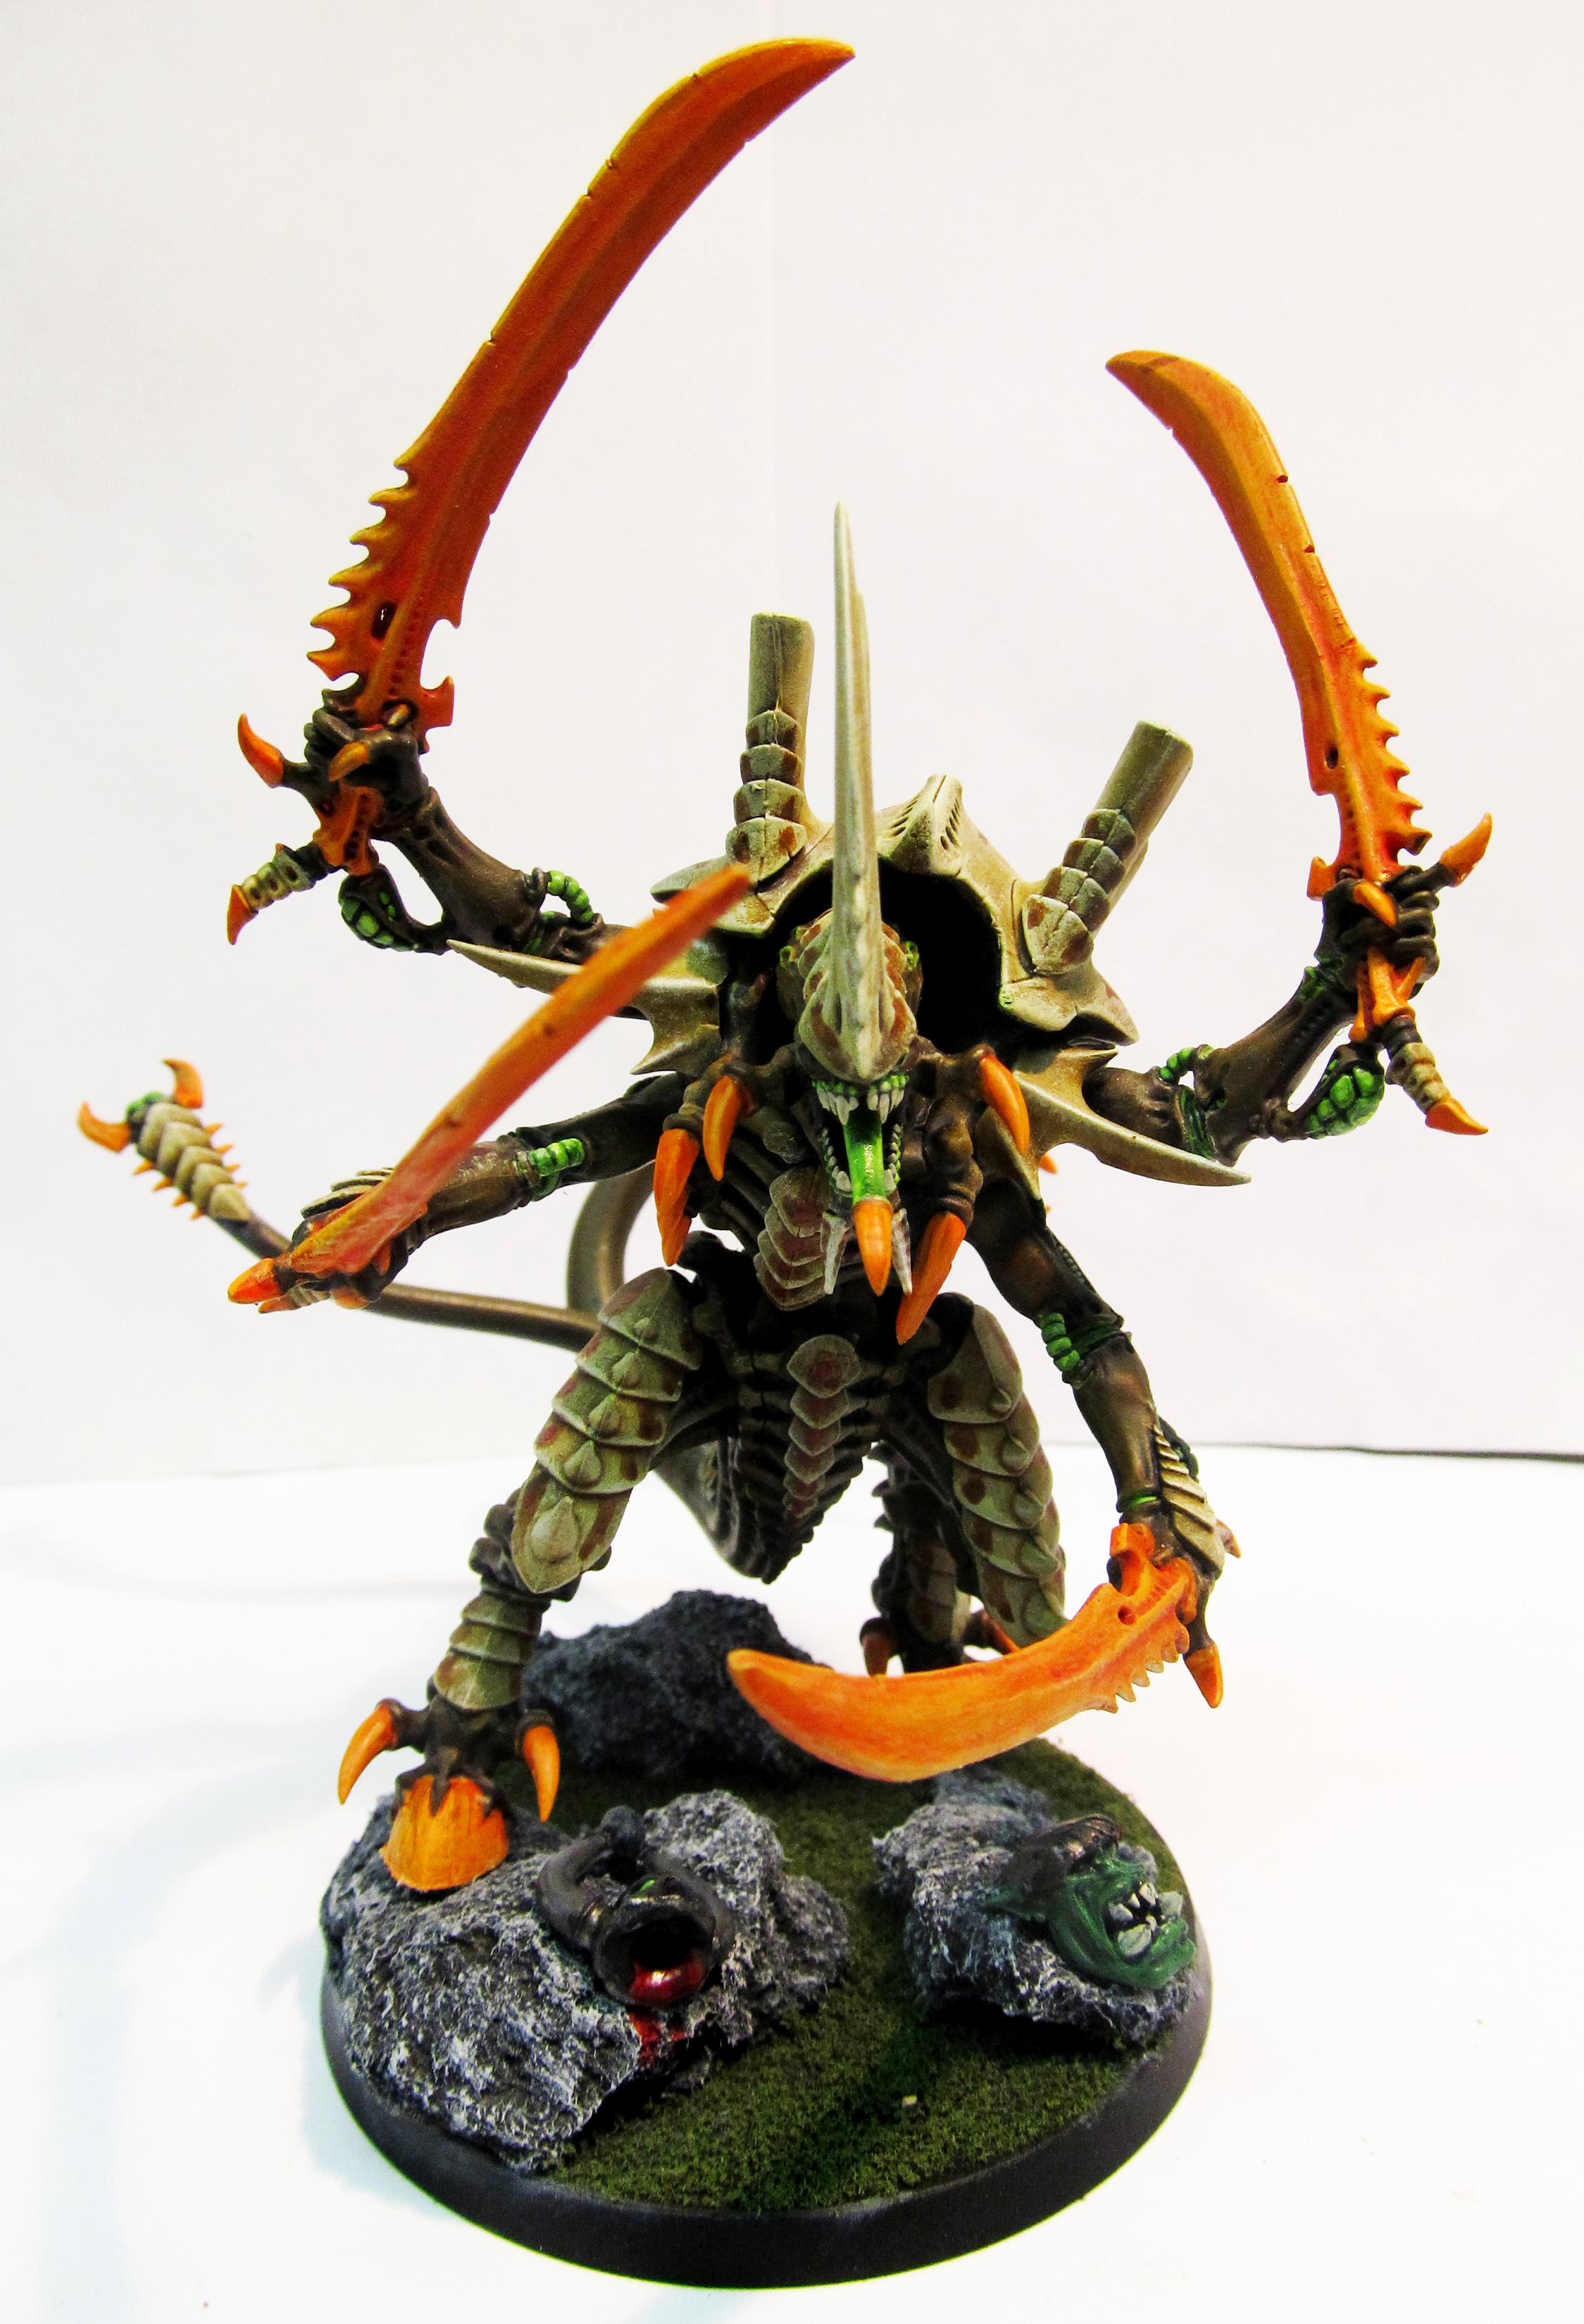 The Swarmlord